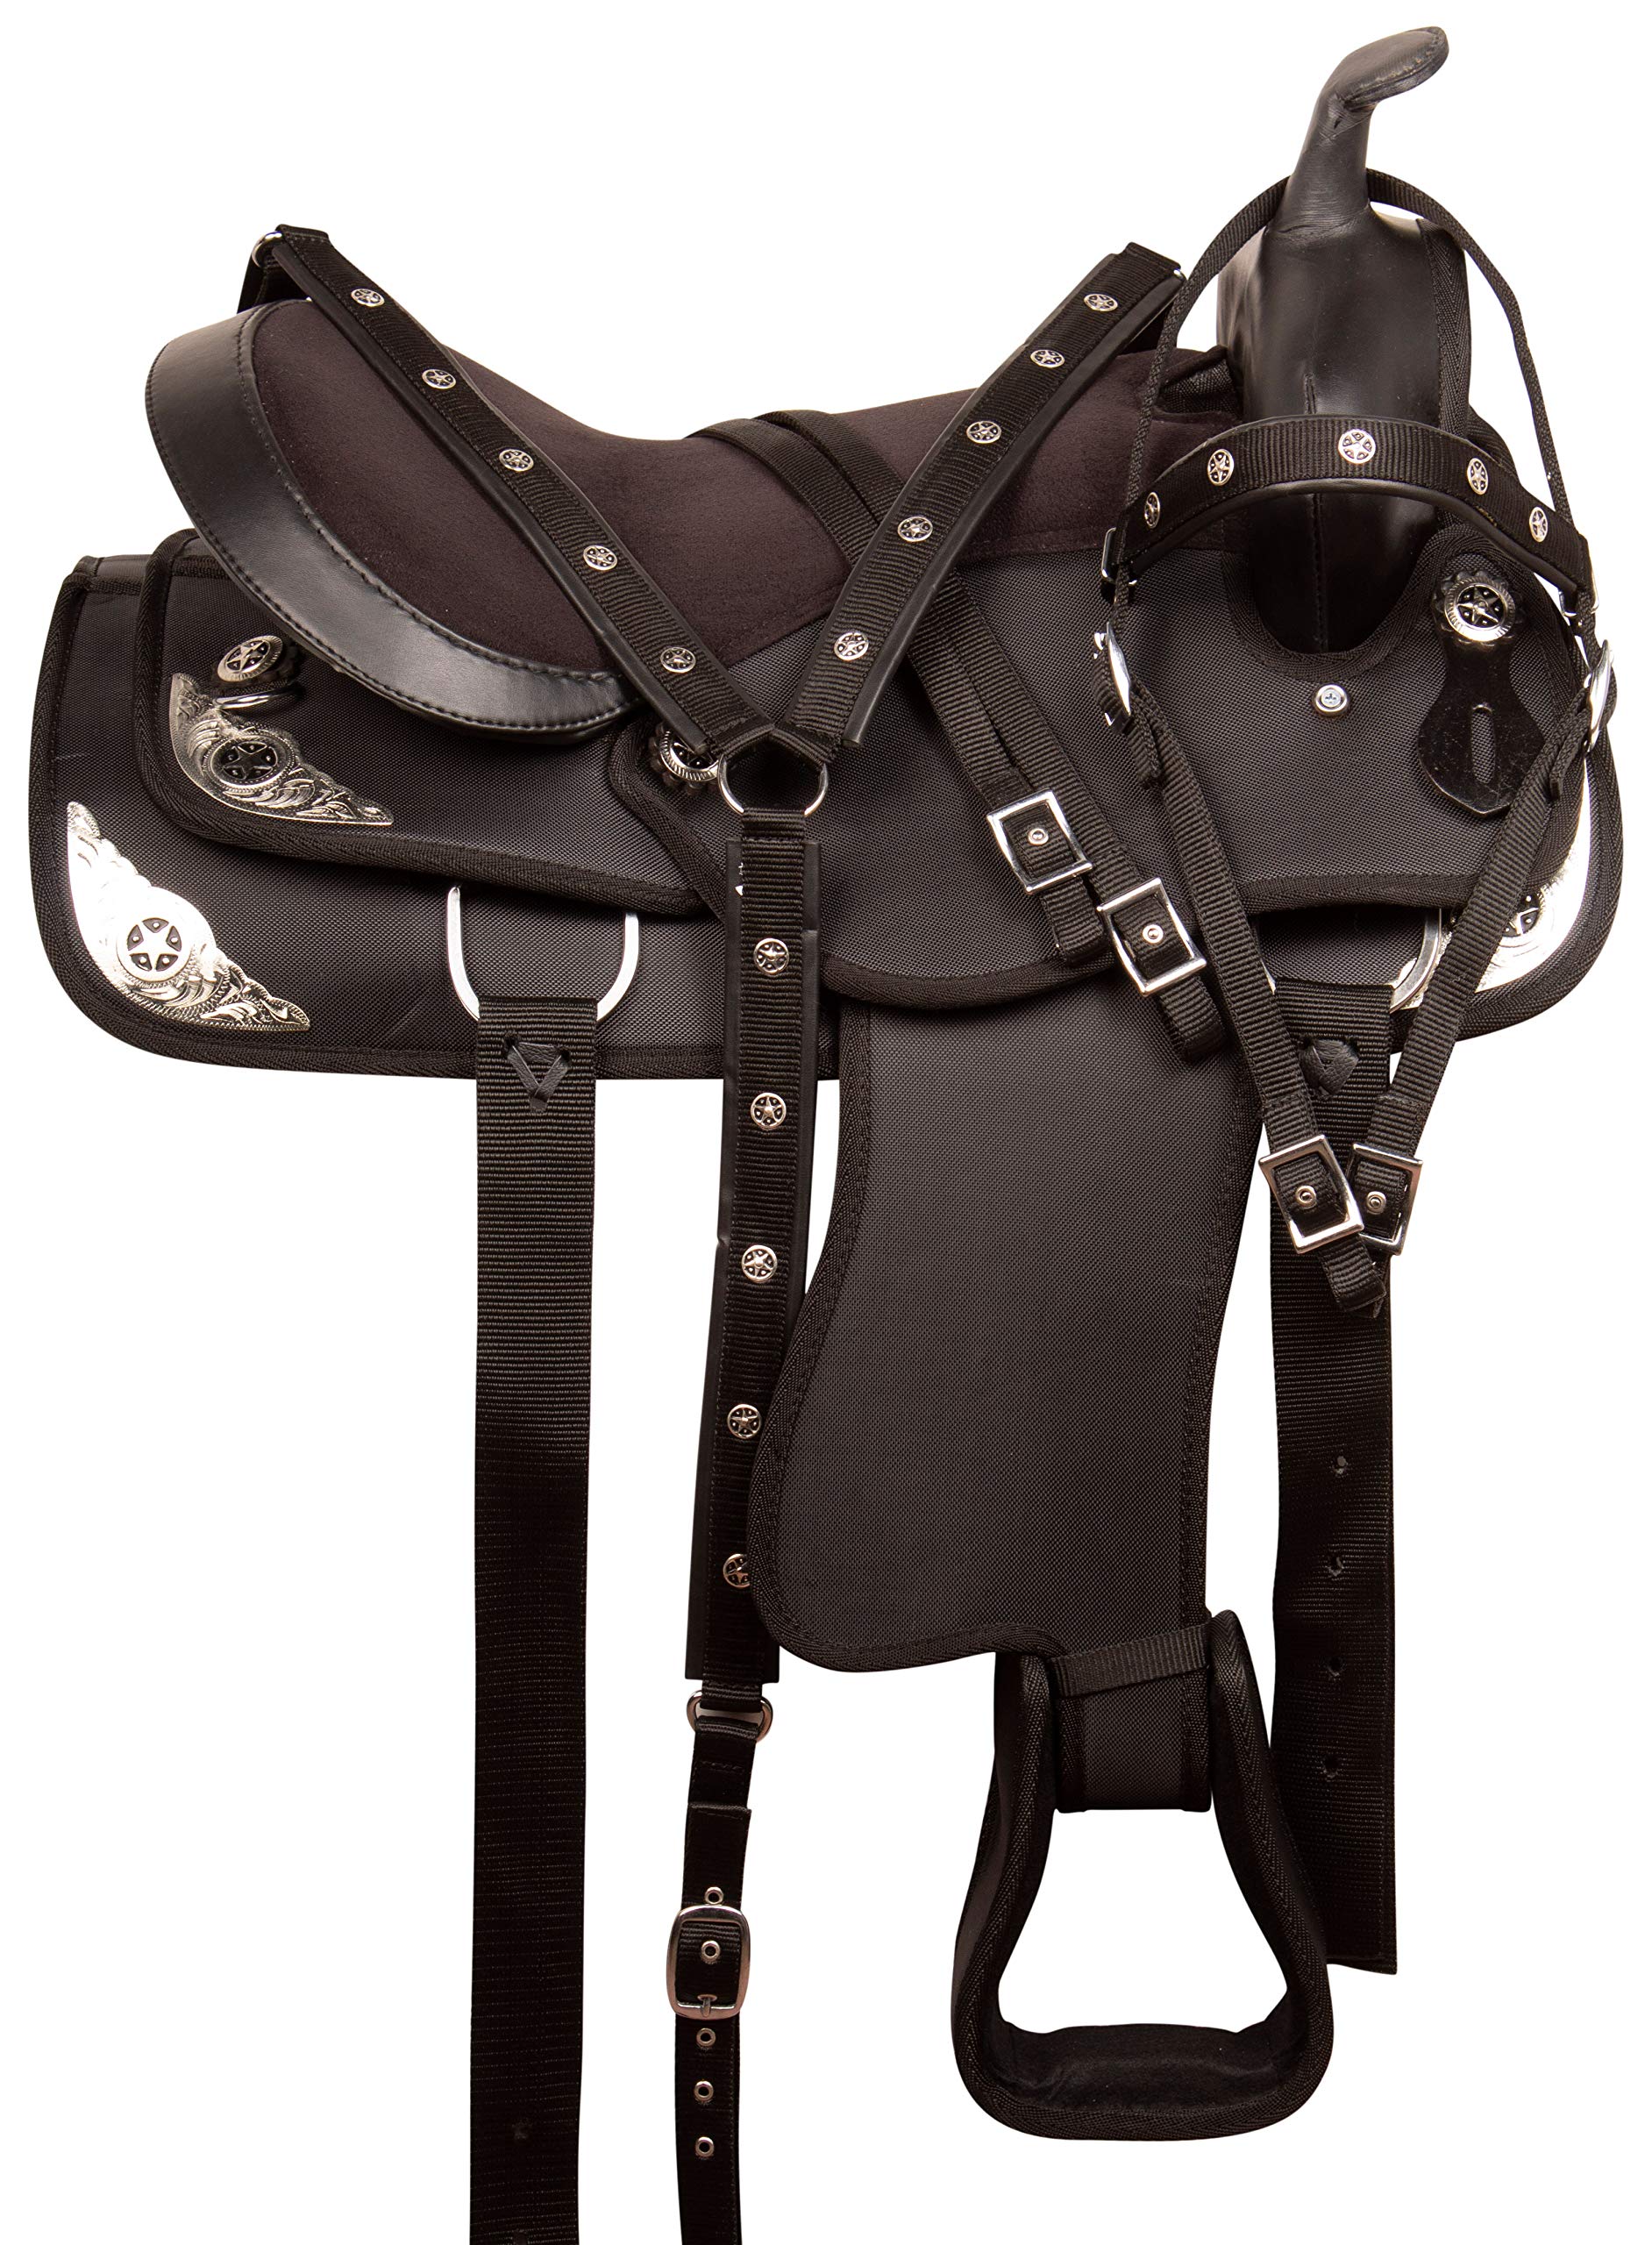 Acerugs 12” 13” 14” 15” 16” 17” 18” WESTERN PLEASURE TRAIL Silver TEXAS STAR LIGHT WEIGHT SYNTHETIC HORSE SADDLE TACK SET PAD (Black, 18" FQHB)